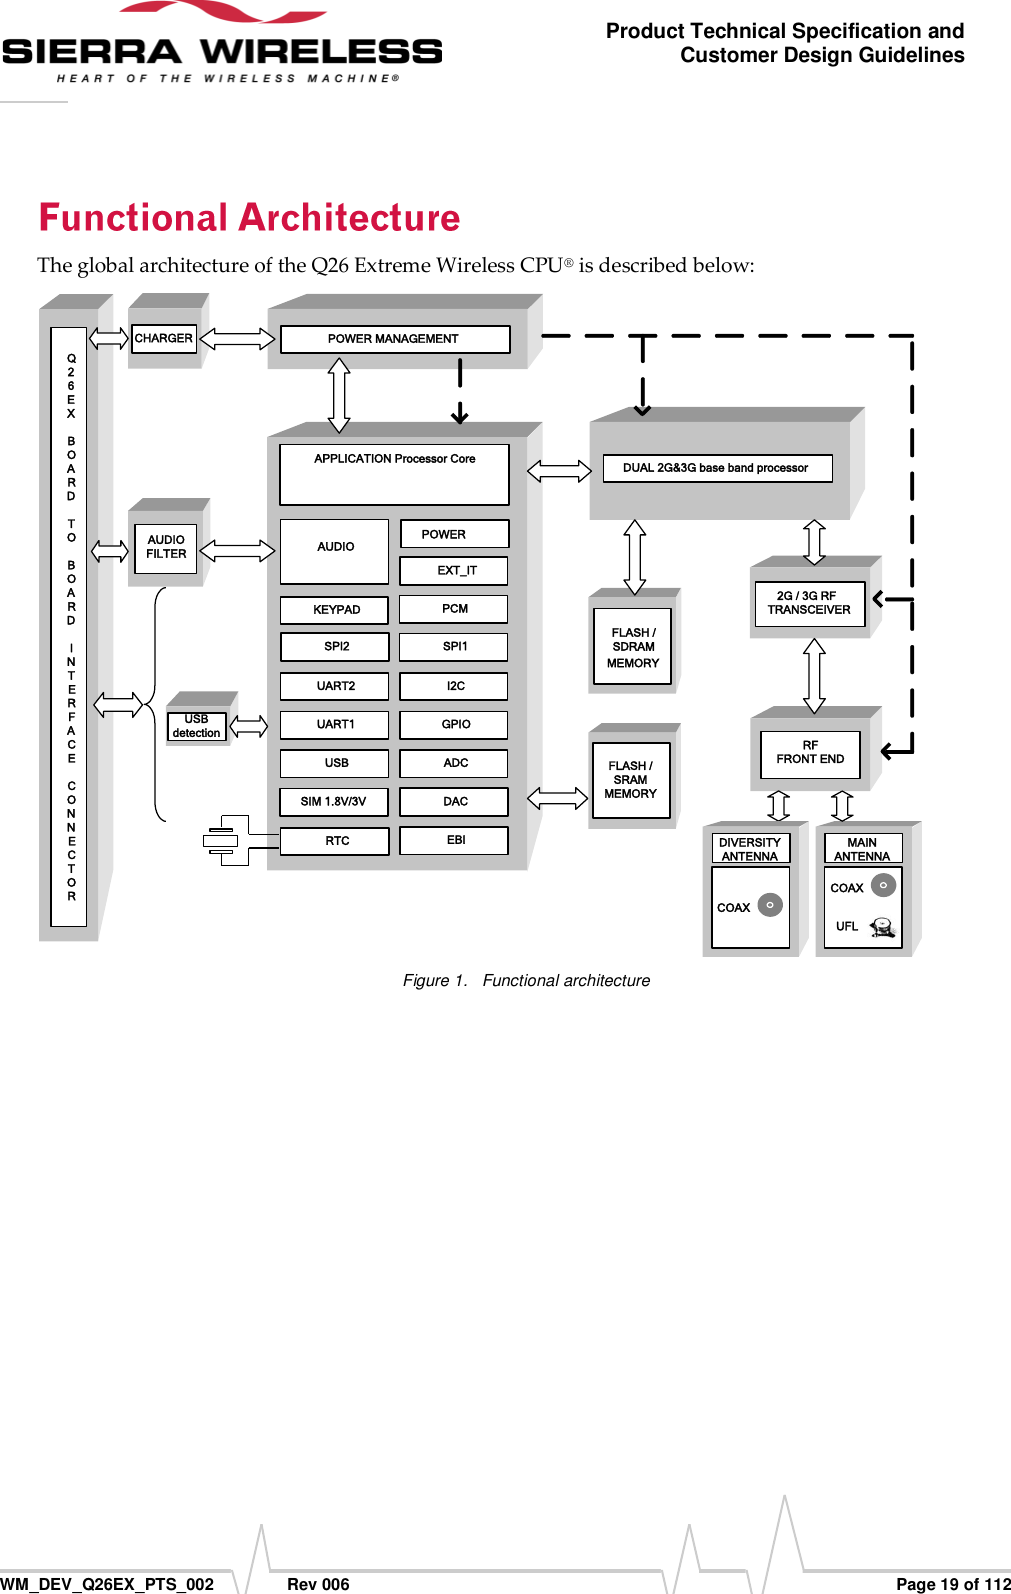      WM_DEV_Q26EX_PTS_002  Rev 006  Page 19 of 112 Product Technical Specification and Customer Design Guidelines The global architecture of the Q26 Extreme Wireless CPU® is described below: AUDIOPOWERUART2PCMUART1USBSIM 1.8V/3VEBIDACADCGPIOSPI1I2CSPI2EXT_ITPOWER MANAGEMENTAUDIO FILTERMEMORYFLASH / SRAMRFFRONT END2G / 3G RFTRANSCEIVERCOAXUFLMAIN ANTENNAQ26EXBOARDTOBOARDINTERFACECONNECTORCHARGER RTCUSB detectionKEYPADDUAL 2G&amp;3G base band processorCOAXDIVERSITY ANTENNAMEMORYFLASH / SDRAMAPPLICATION Processor Core Figure 1.  Functional architecture  